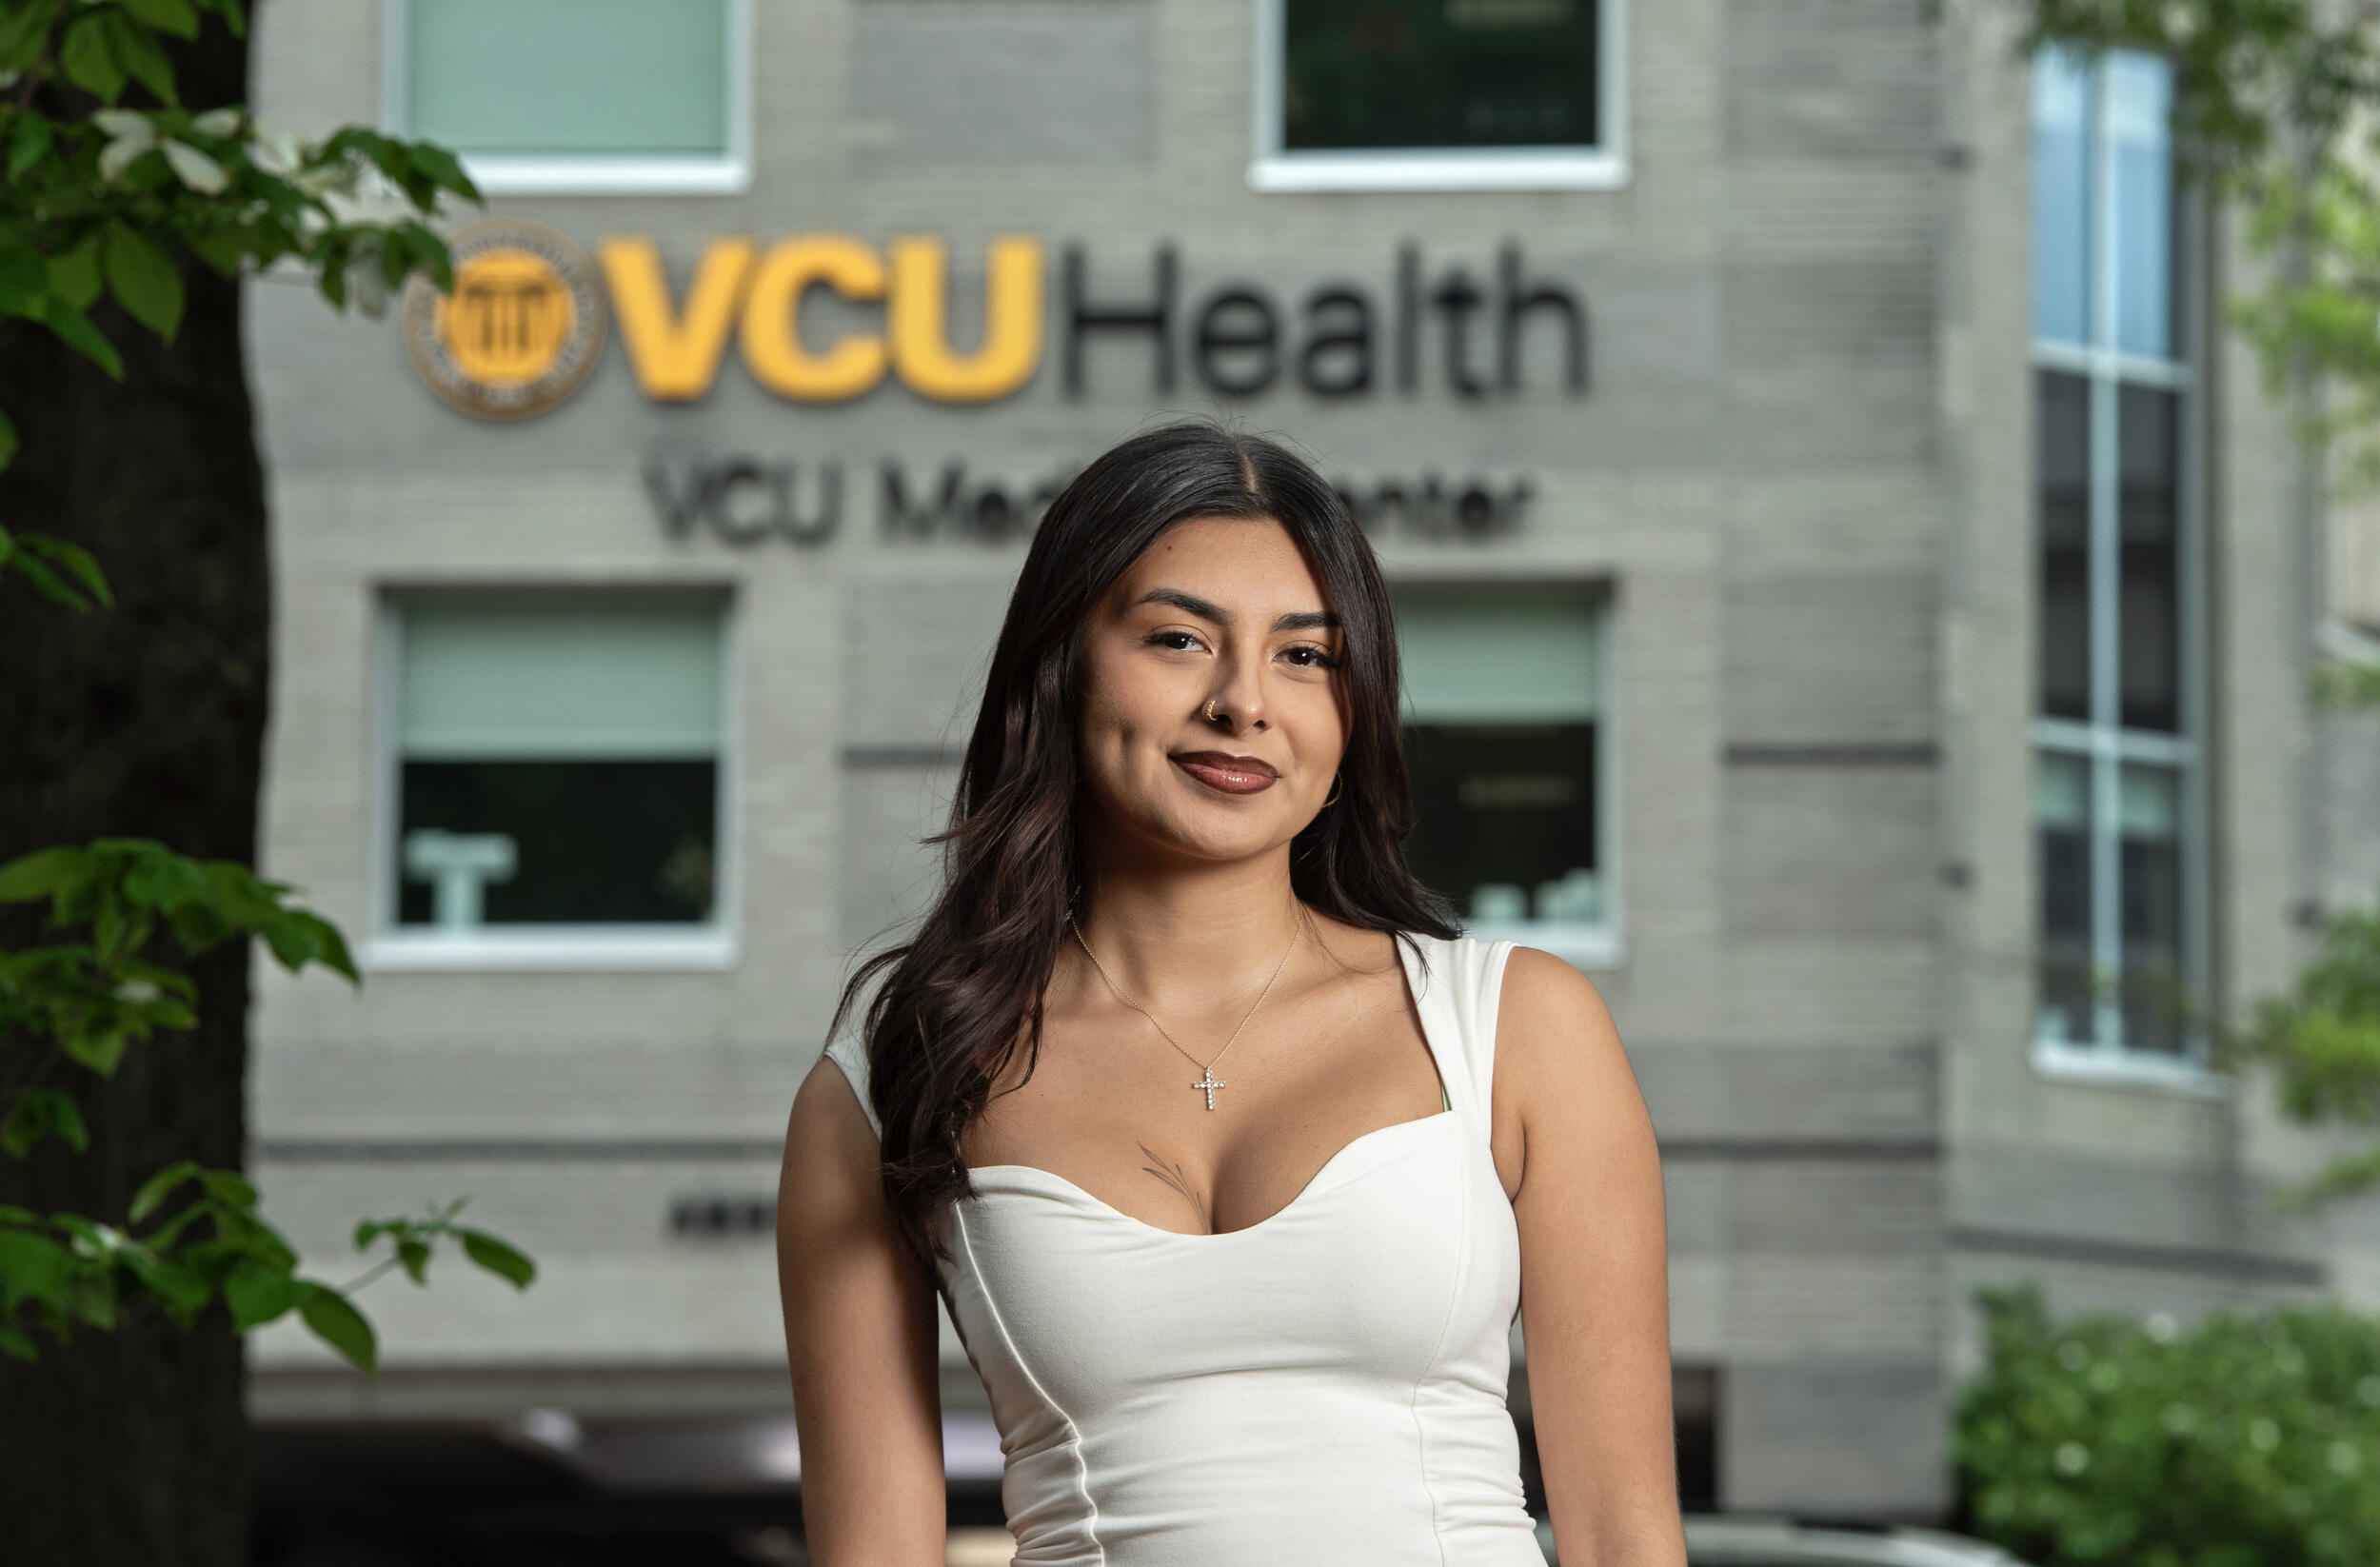 A photo of a woman from the waist up standing in front of a building that says \"VCU Health VCU Medical Center\" on it. 